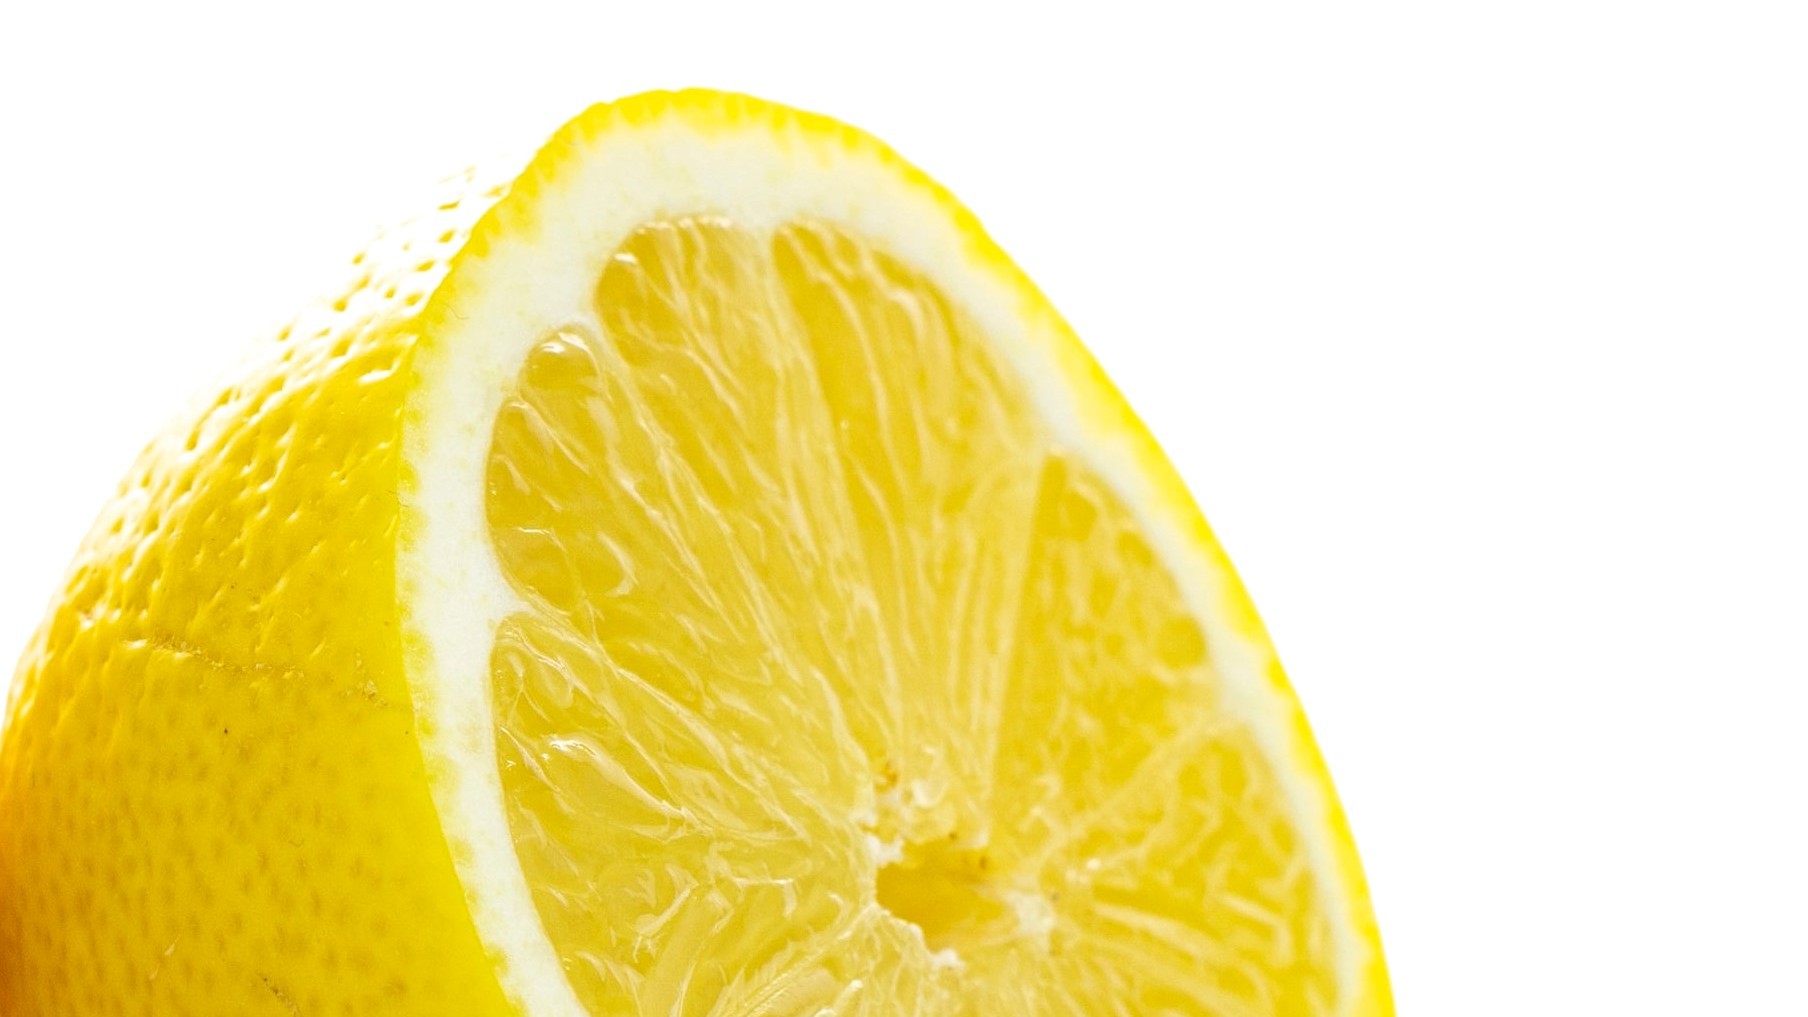 Is Lemon Juice Good For Your Hair?